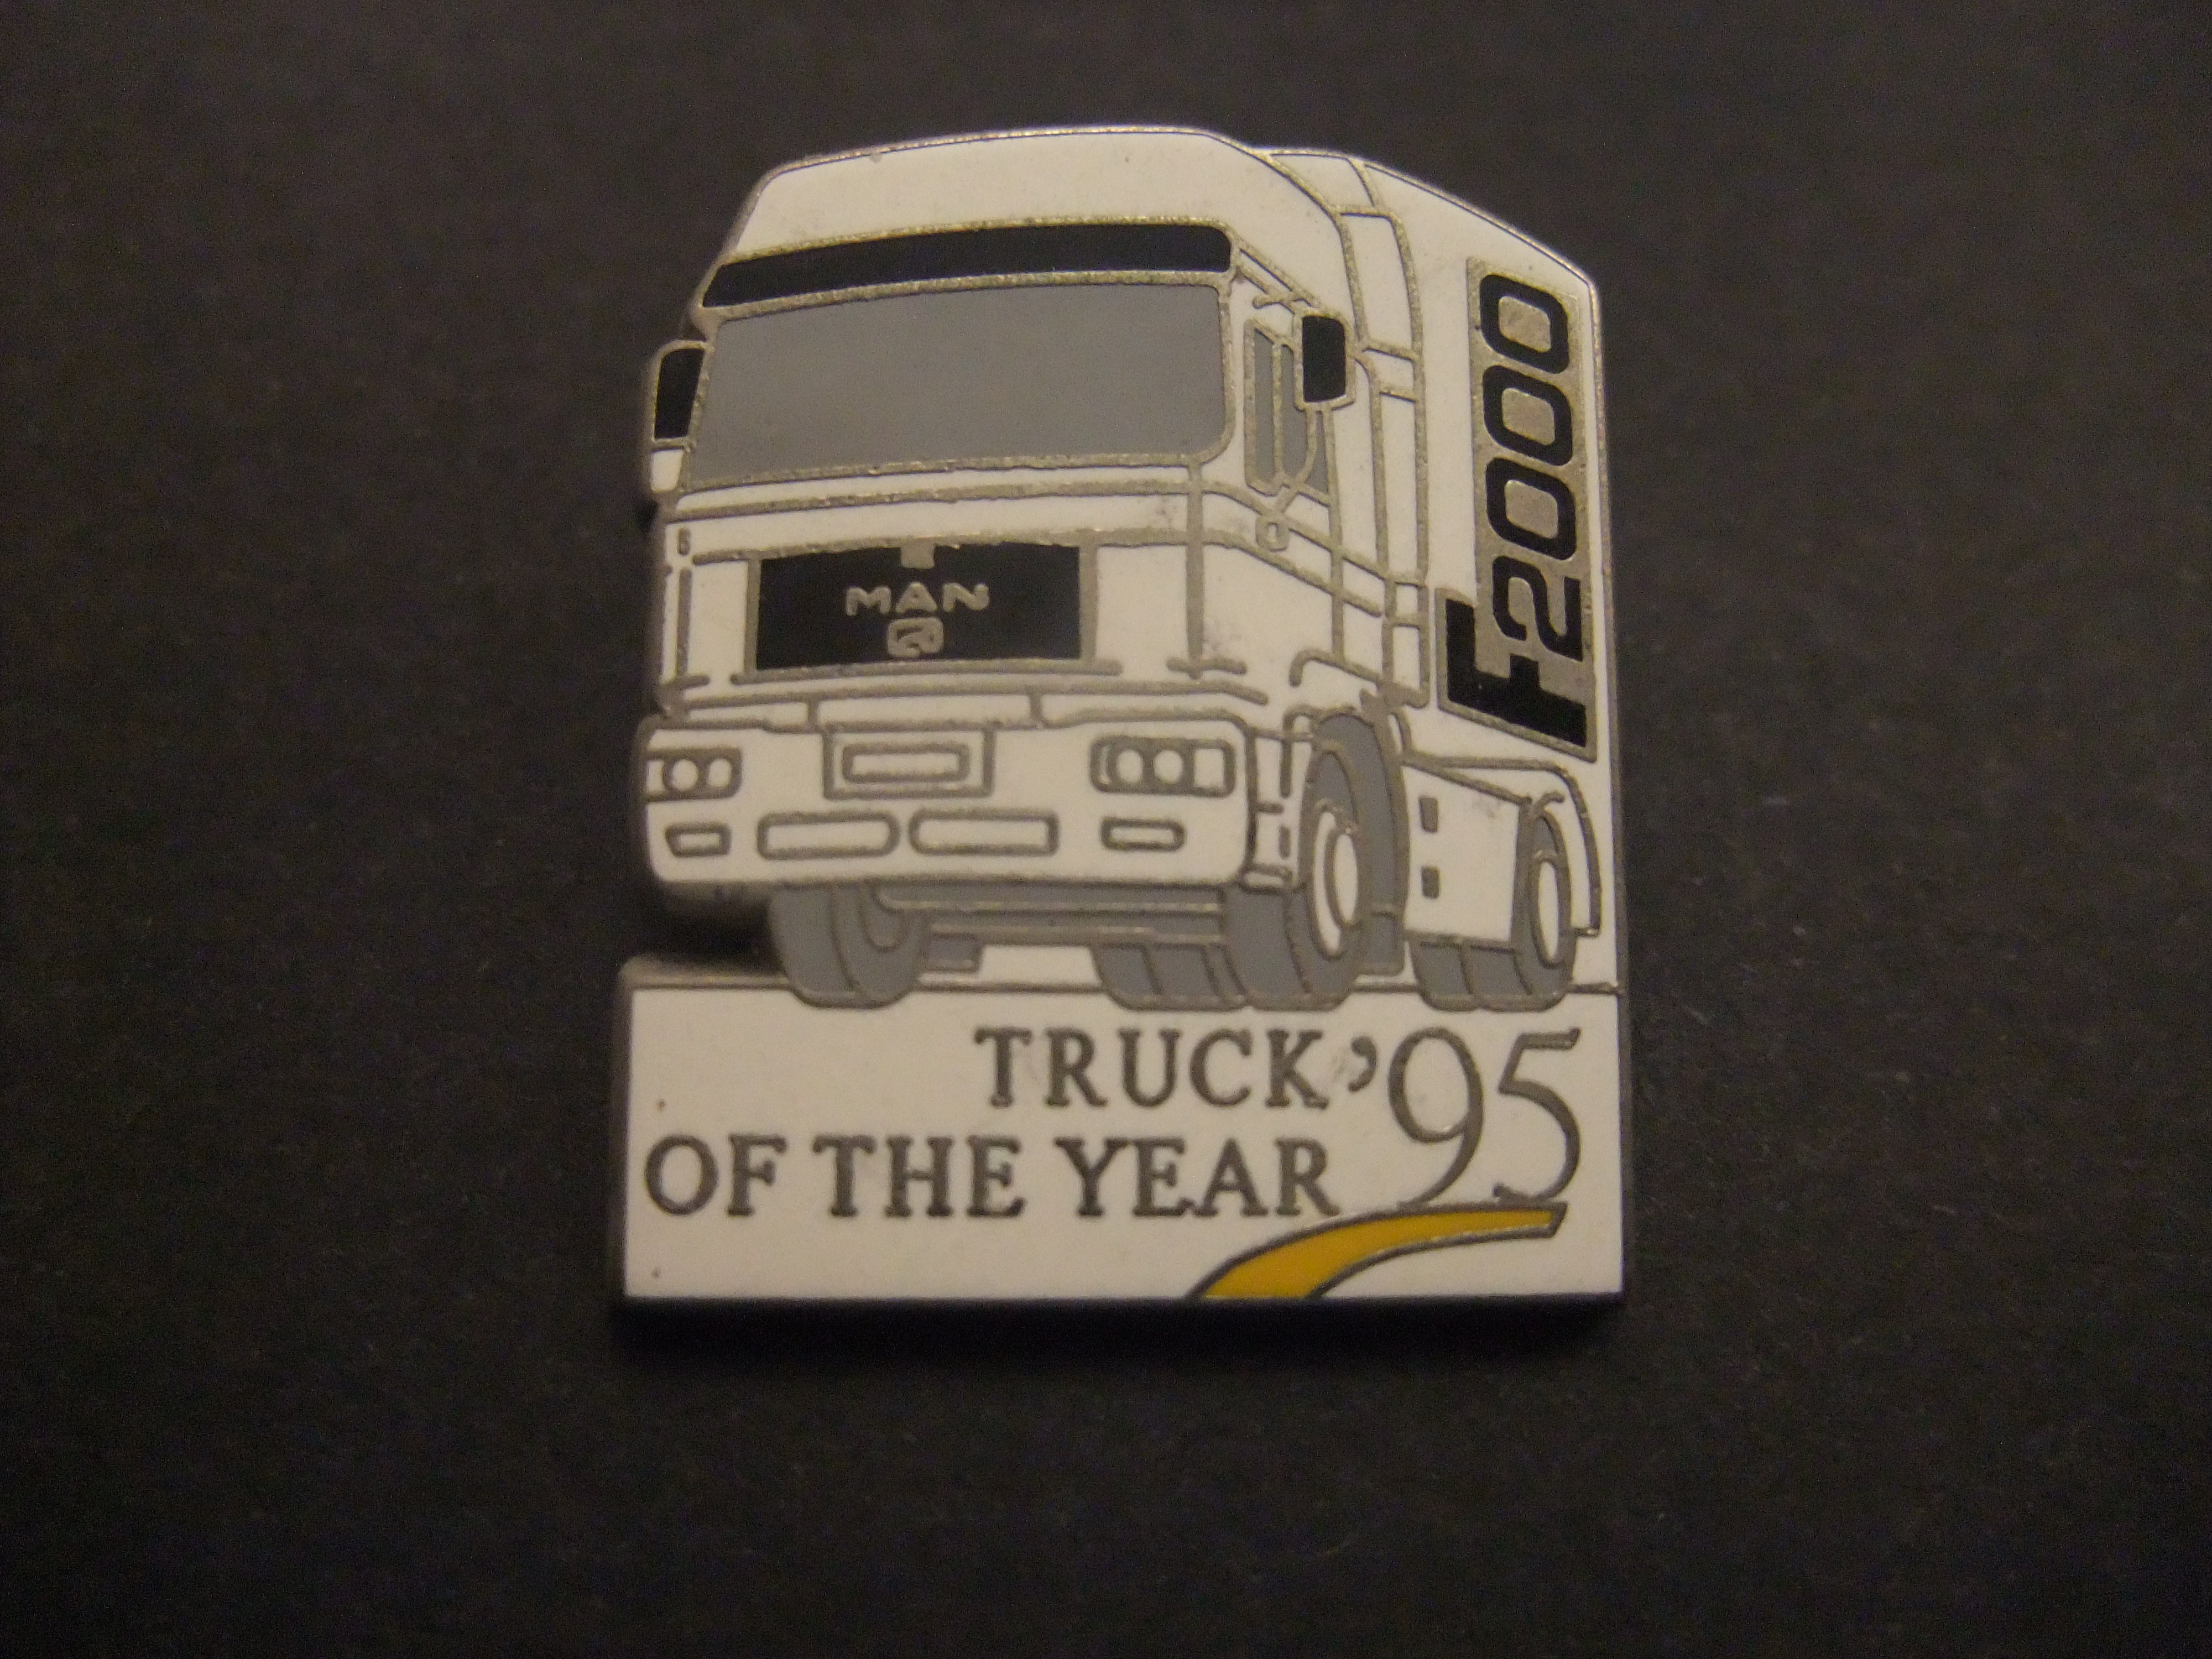 MAN F 2000 Truck of The Year 1995